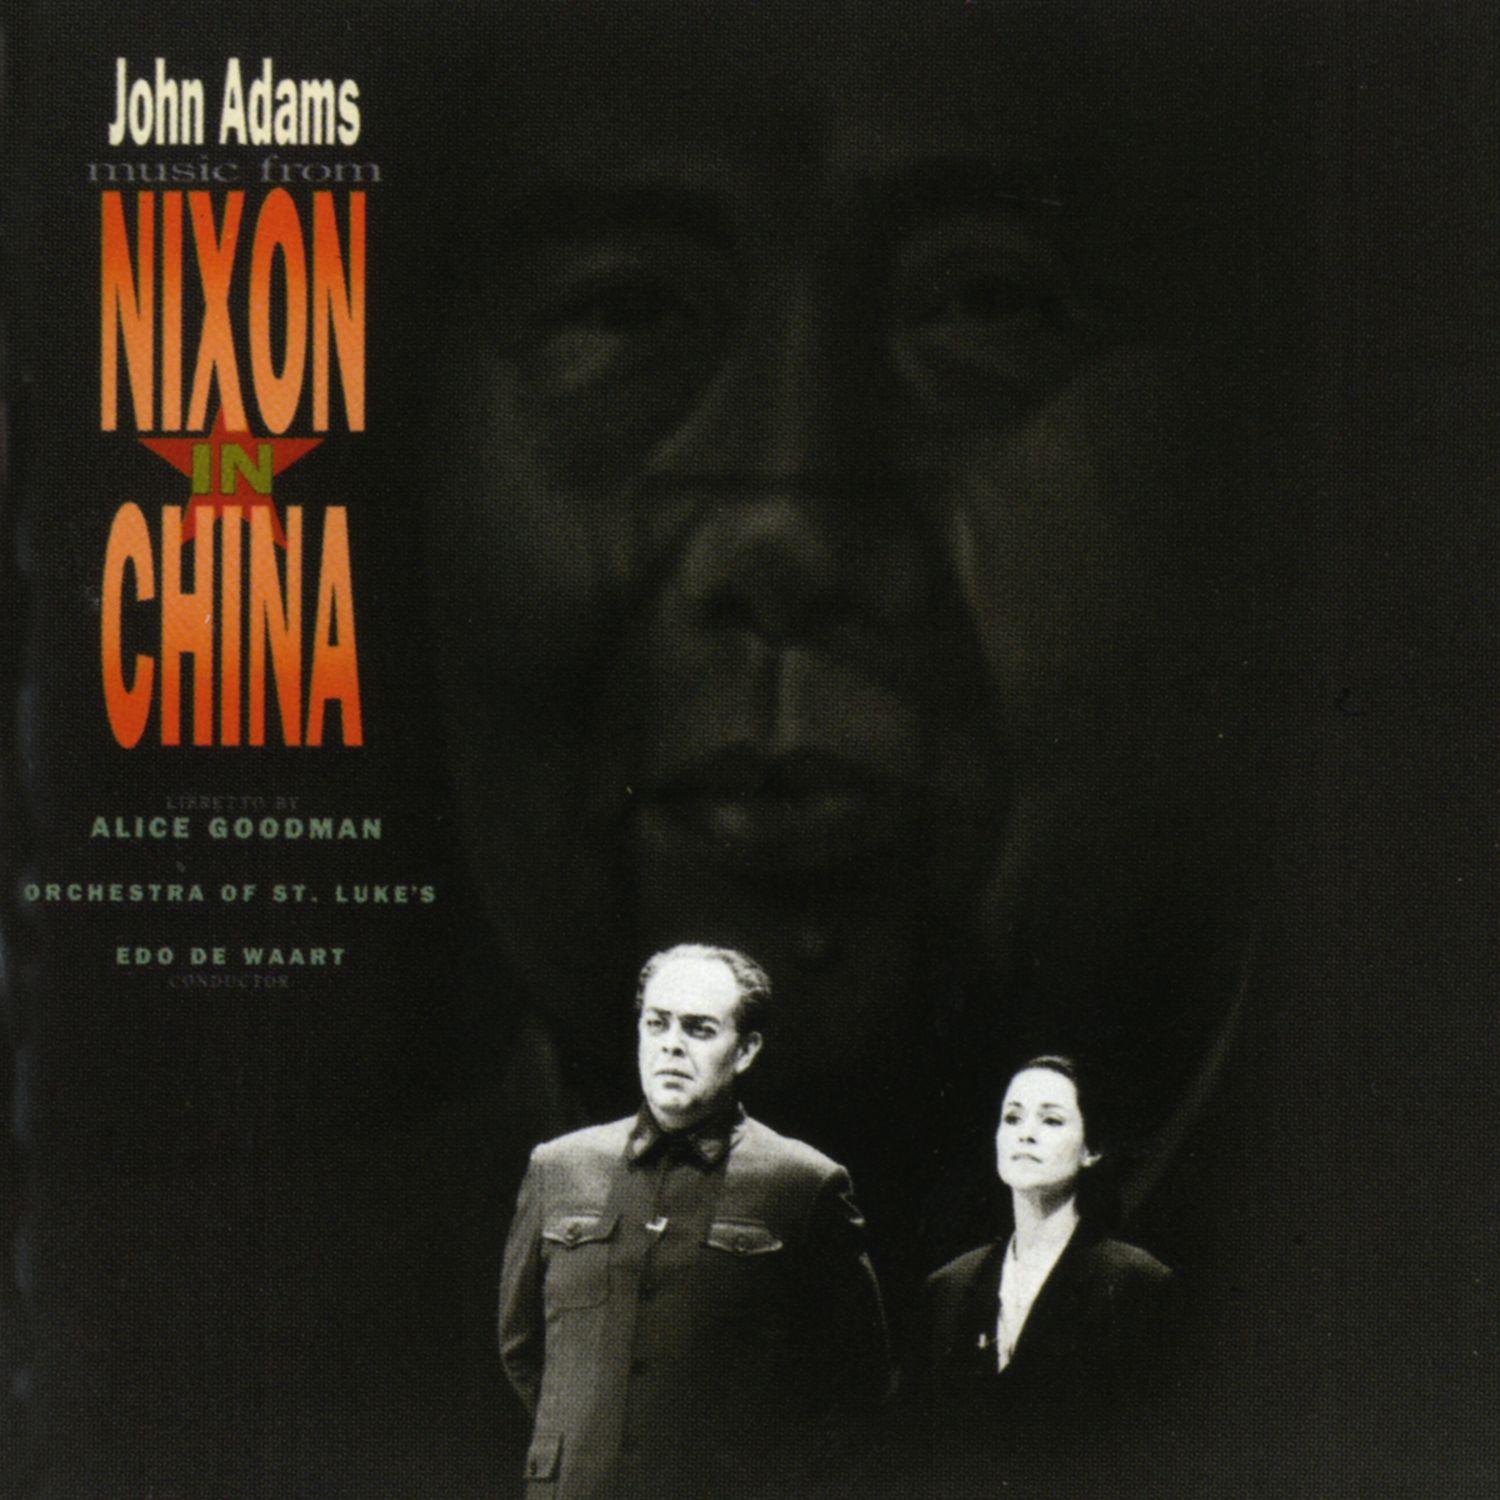 Nixon in China, Act I, Scene 1:"News Has a Kind of Mystery"